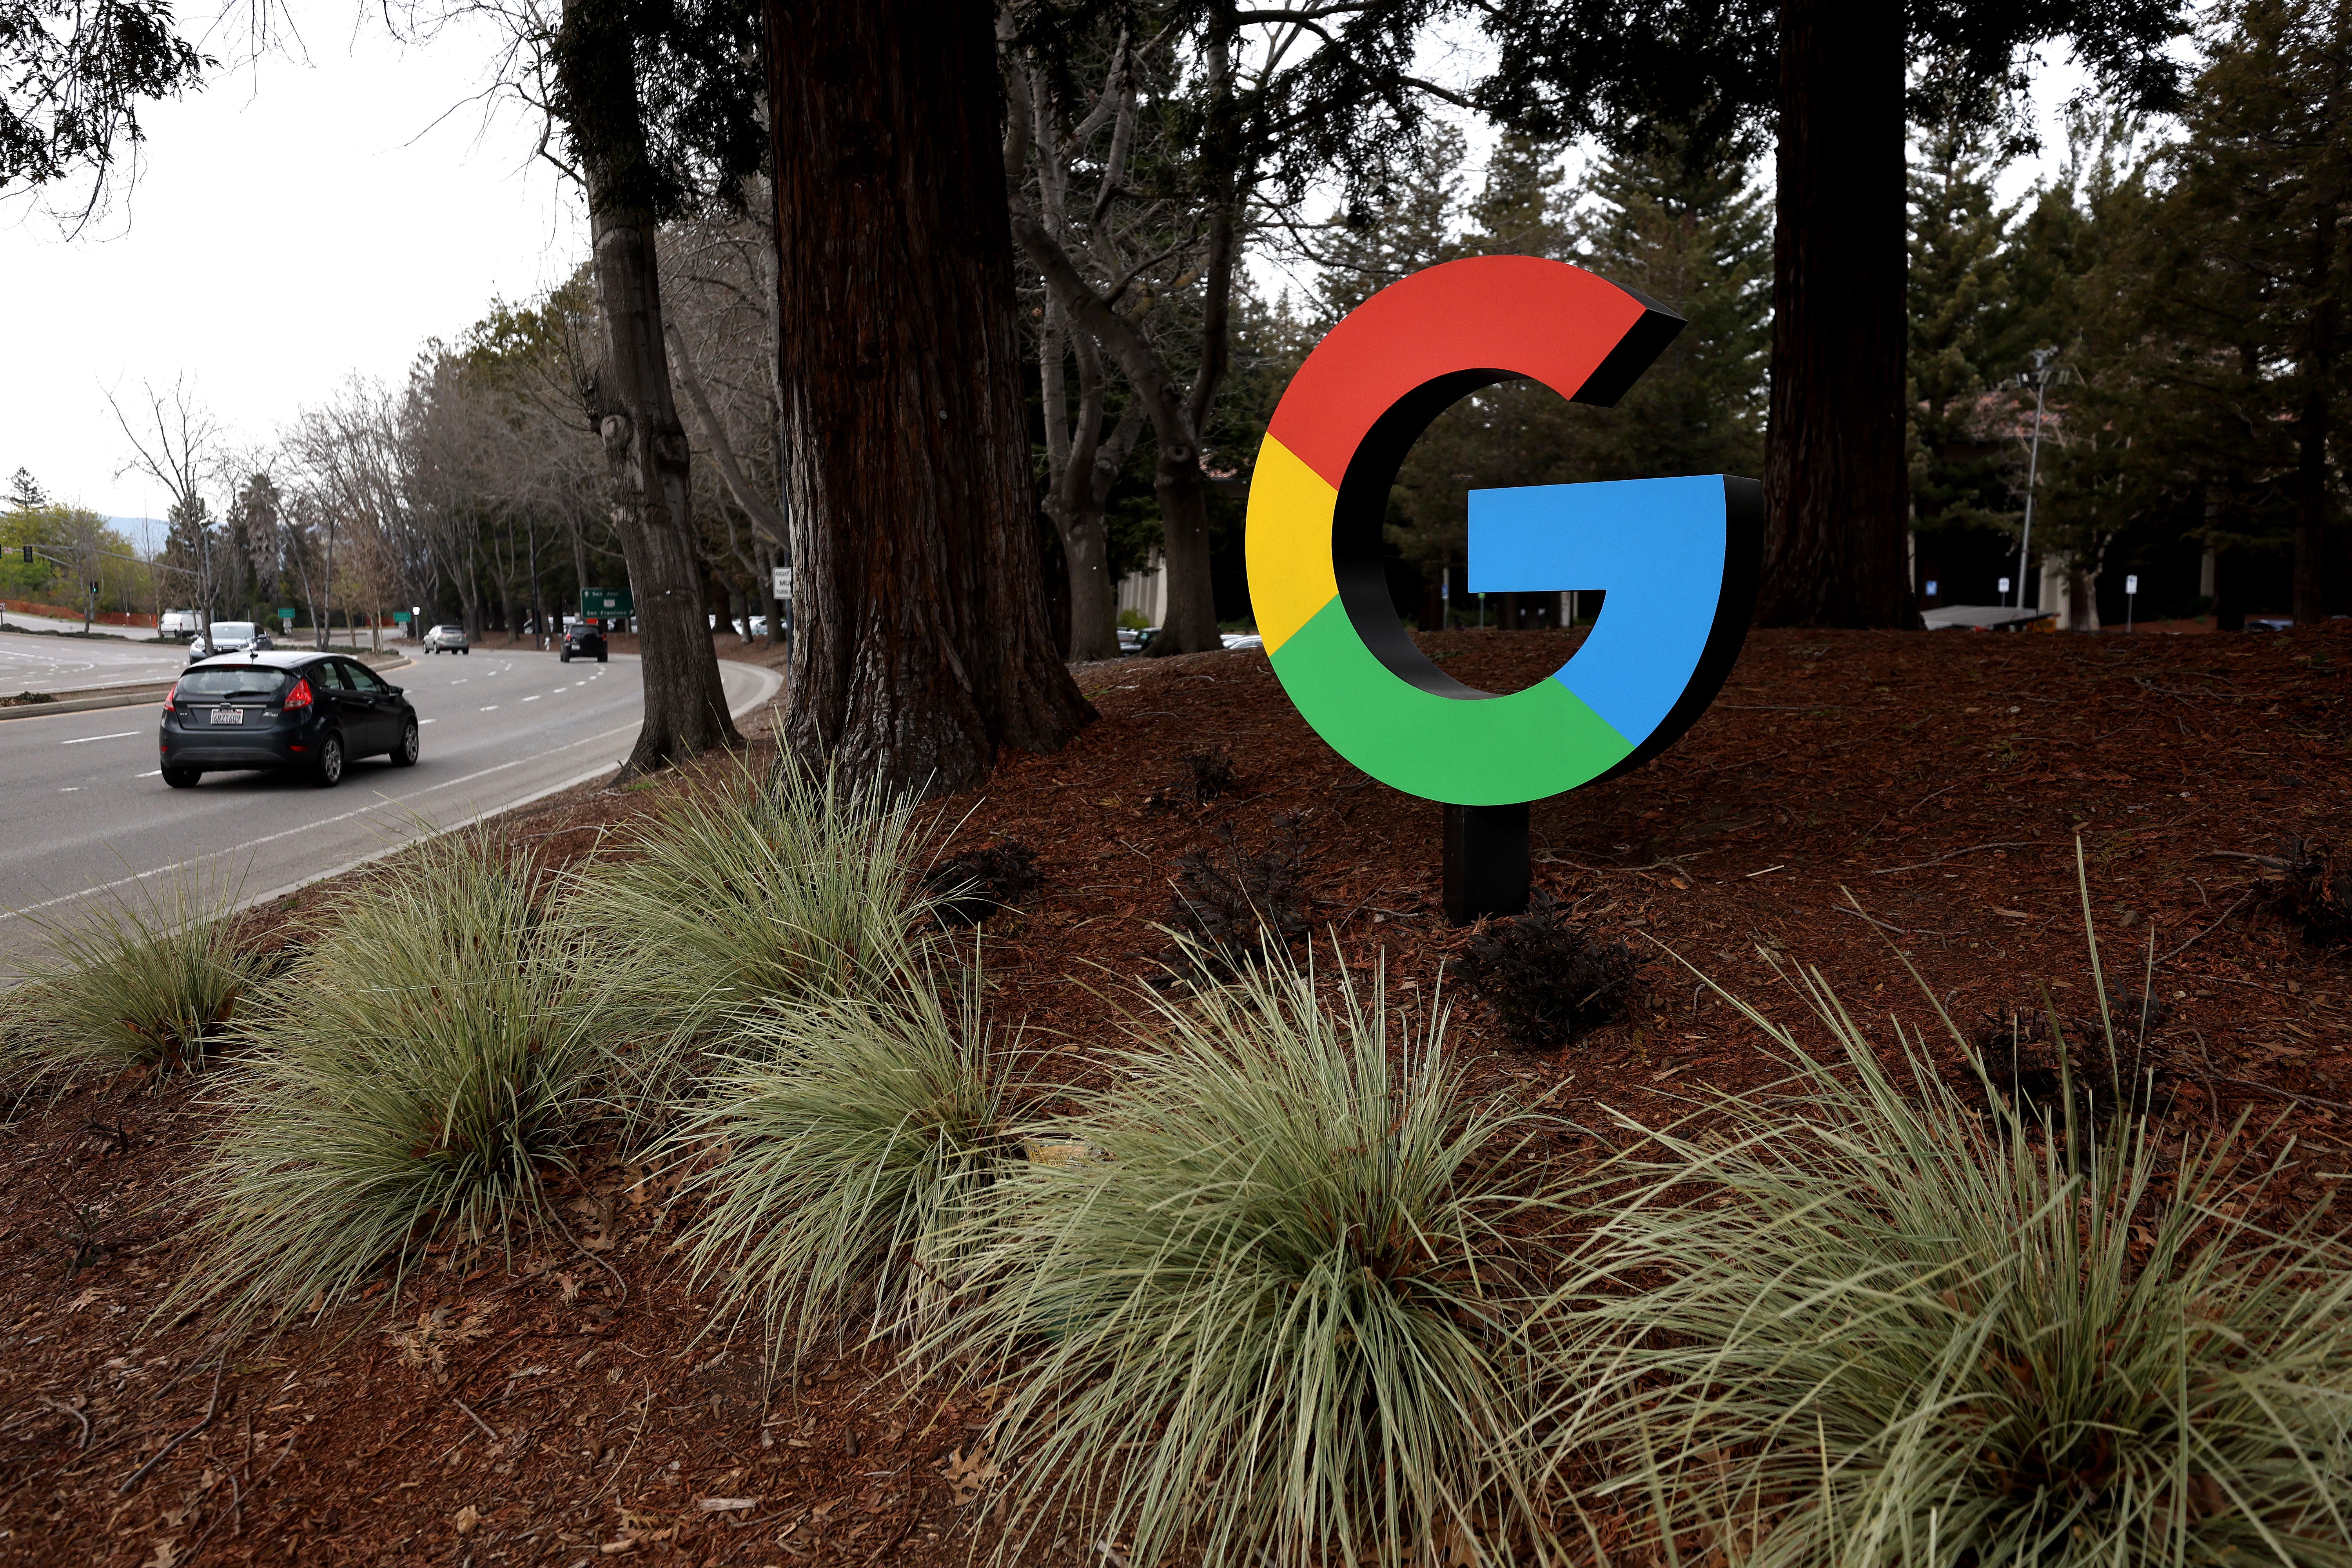 A sign for the Google logo stands amid a field of trees and grass.